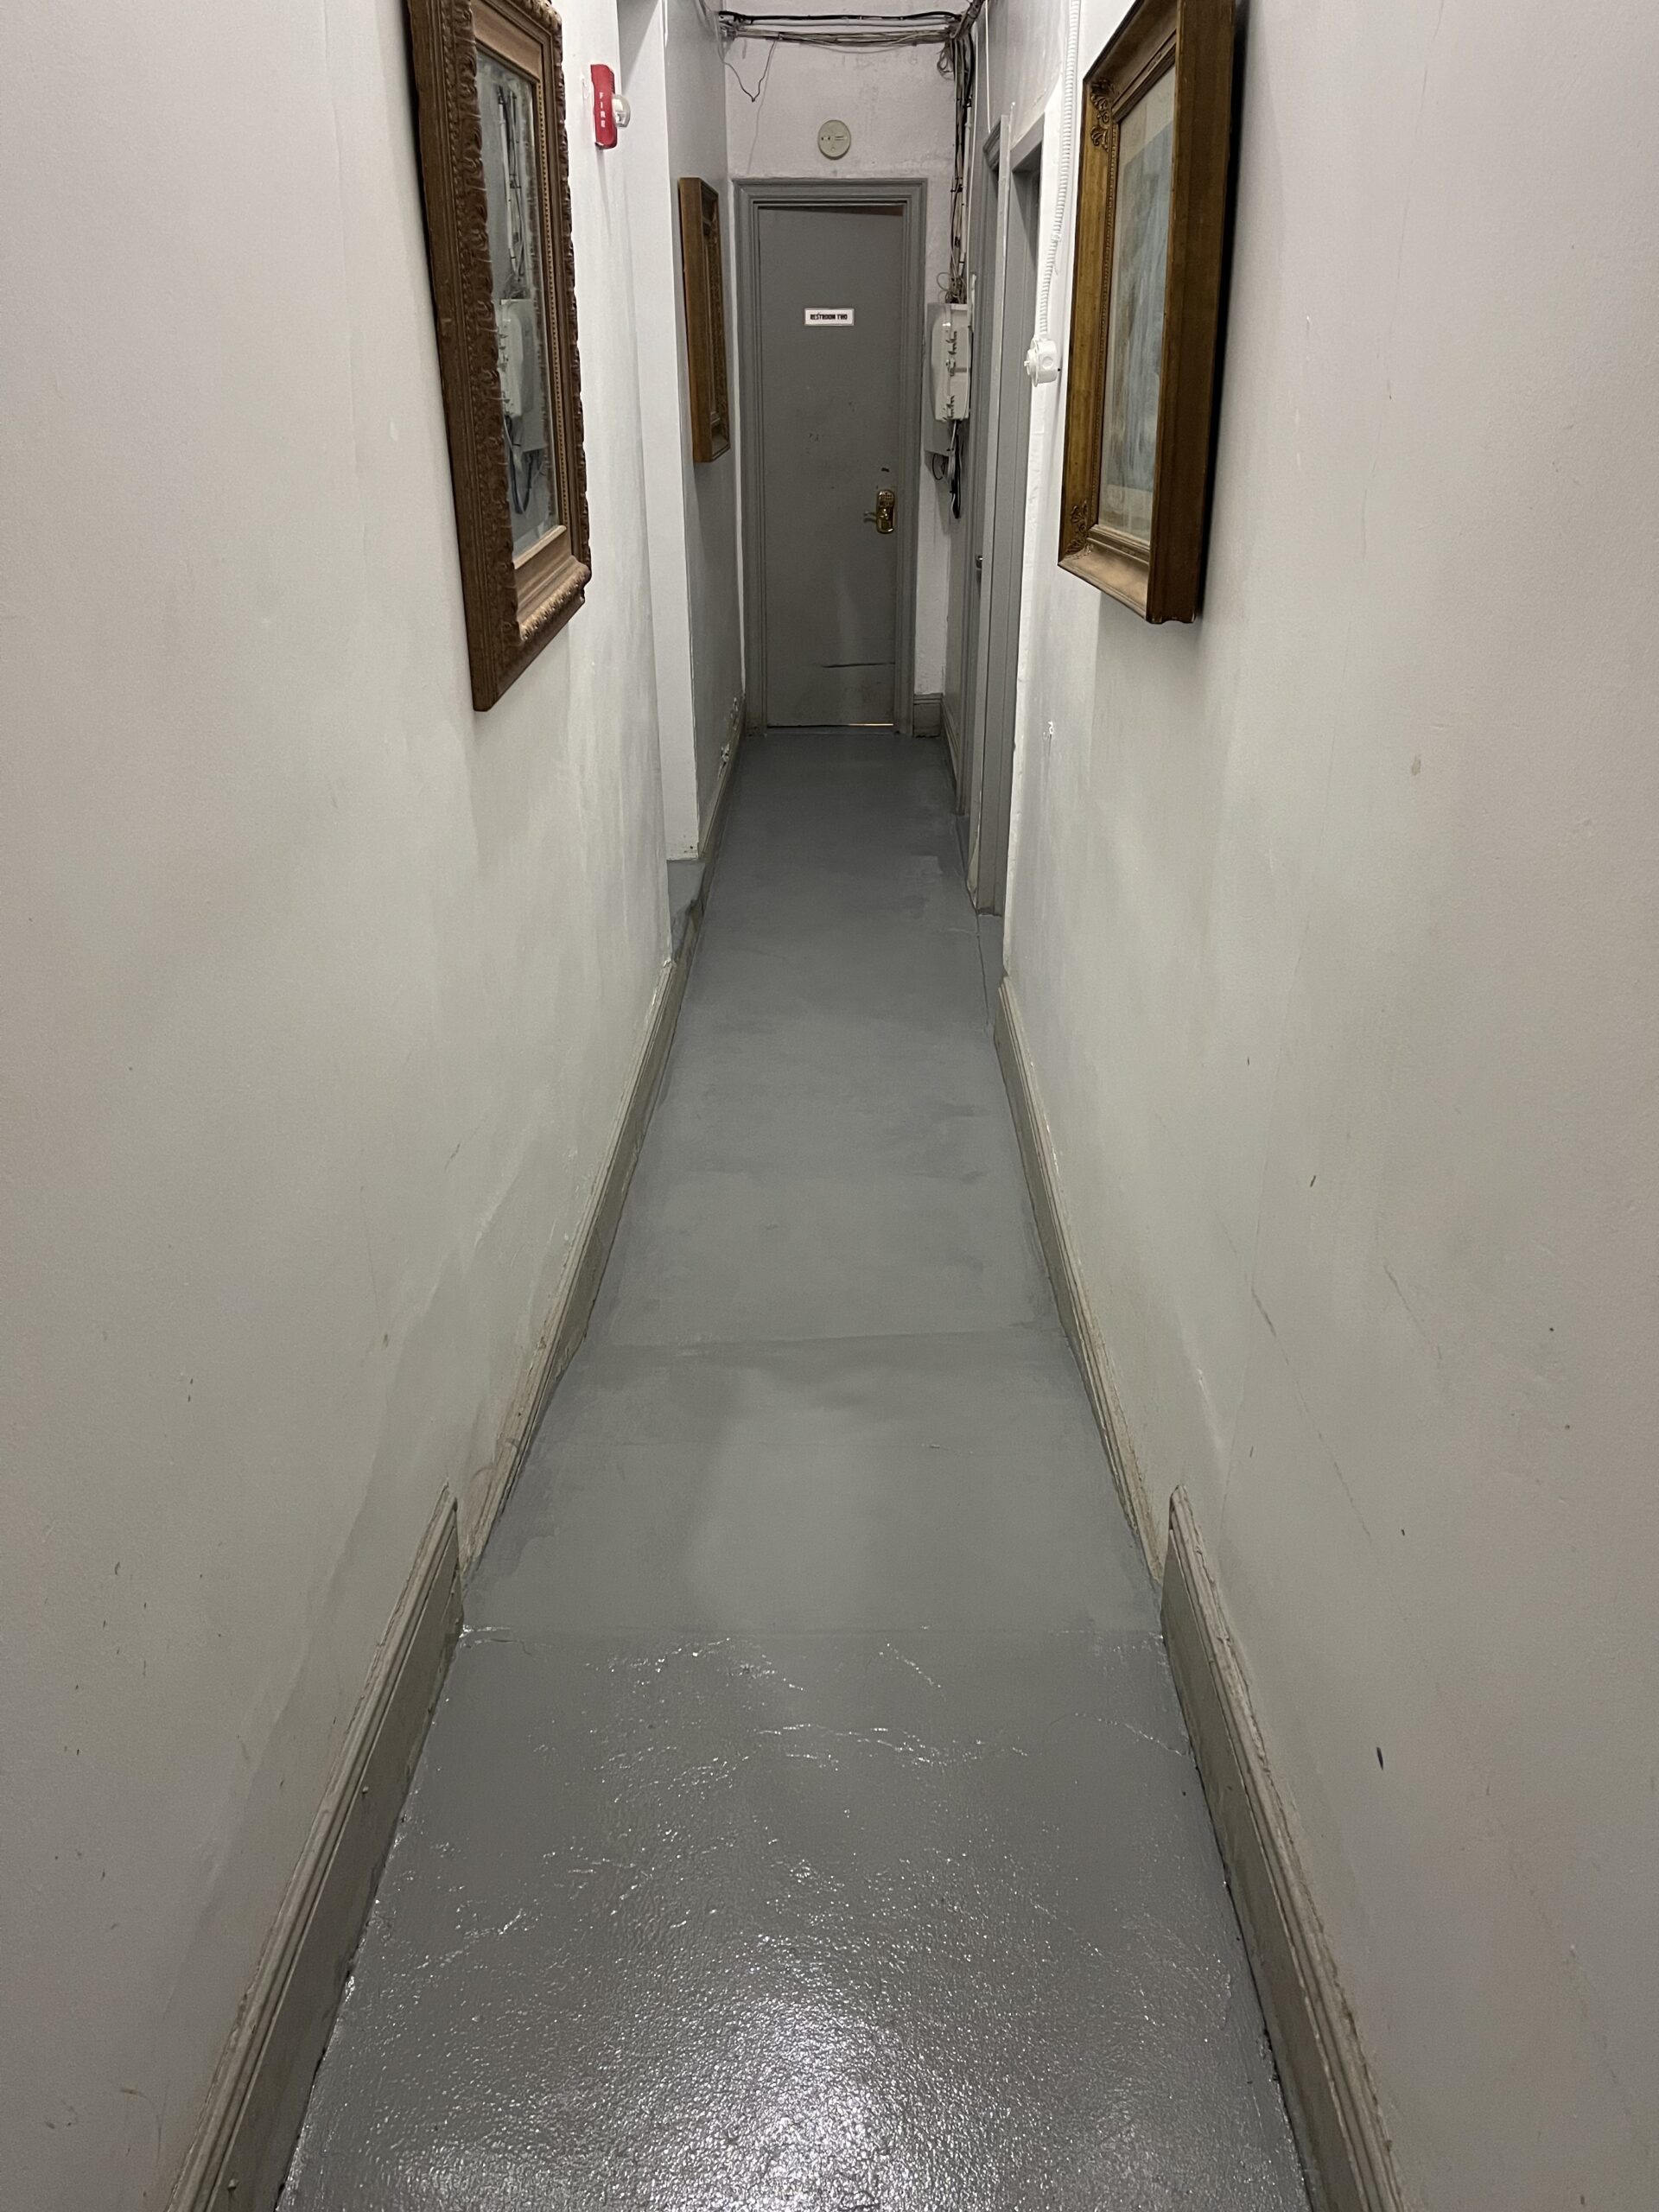 A hallway with two doors and no walls.